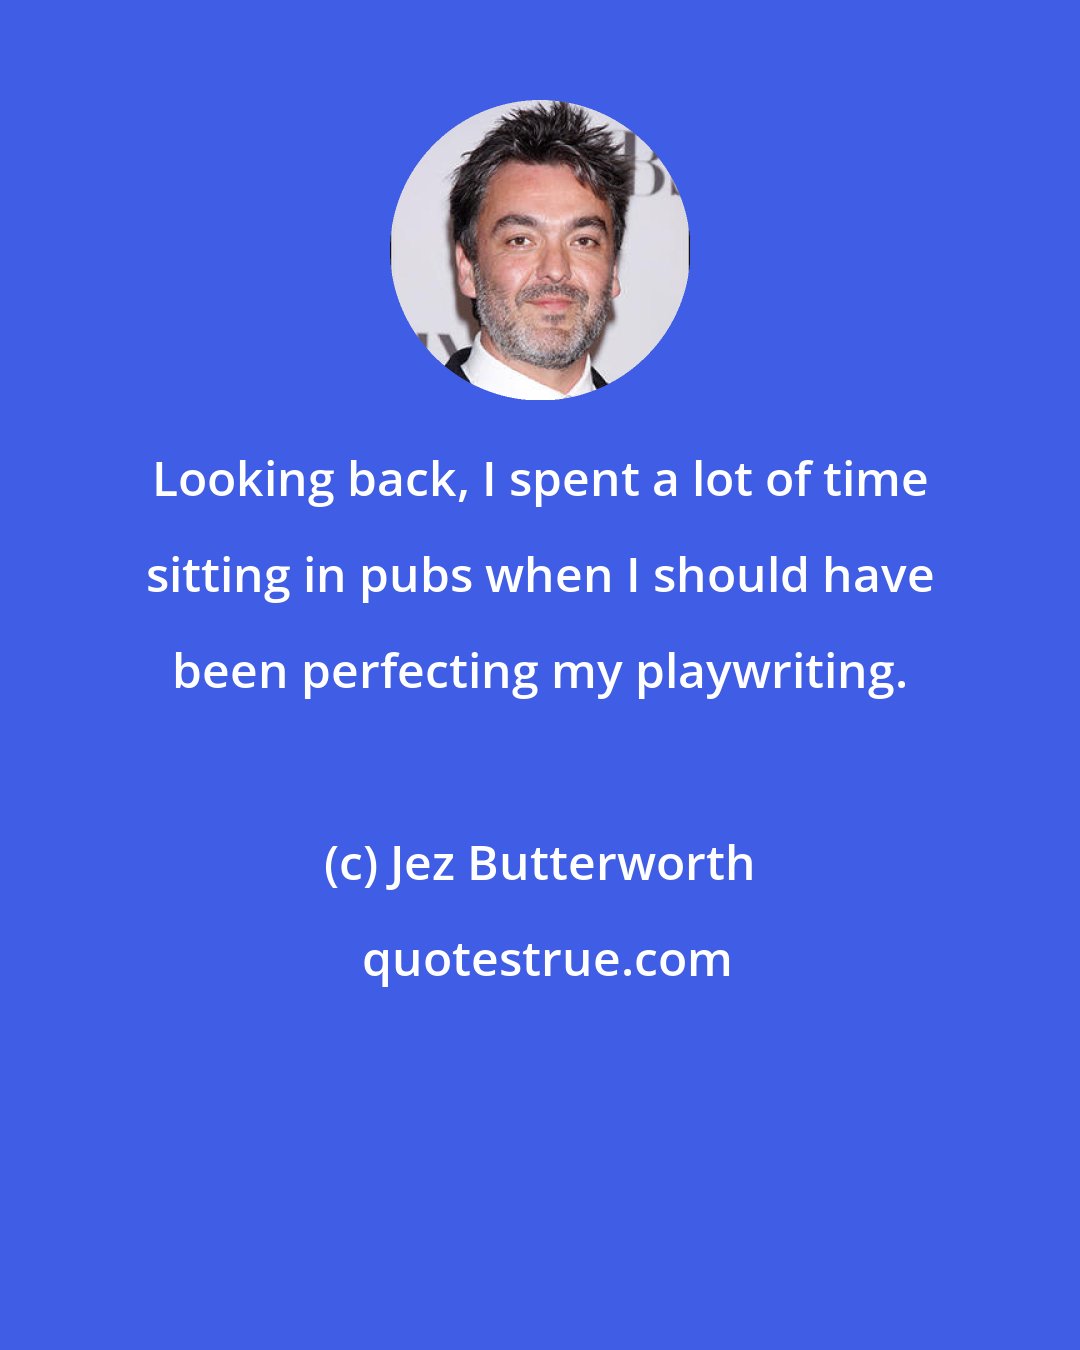 Jez Butterworth: Looking back, I spent a lot of time sitting in pubs when I should have been perfecting my playwriting.